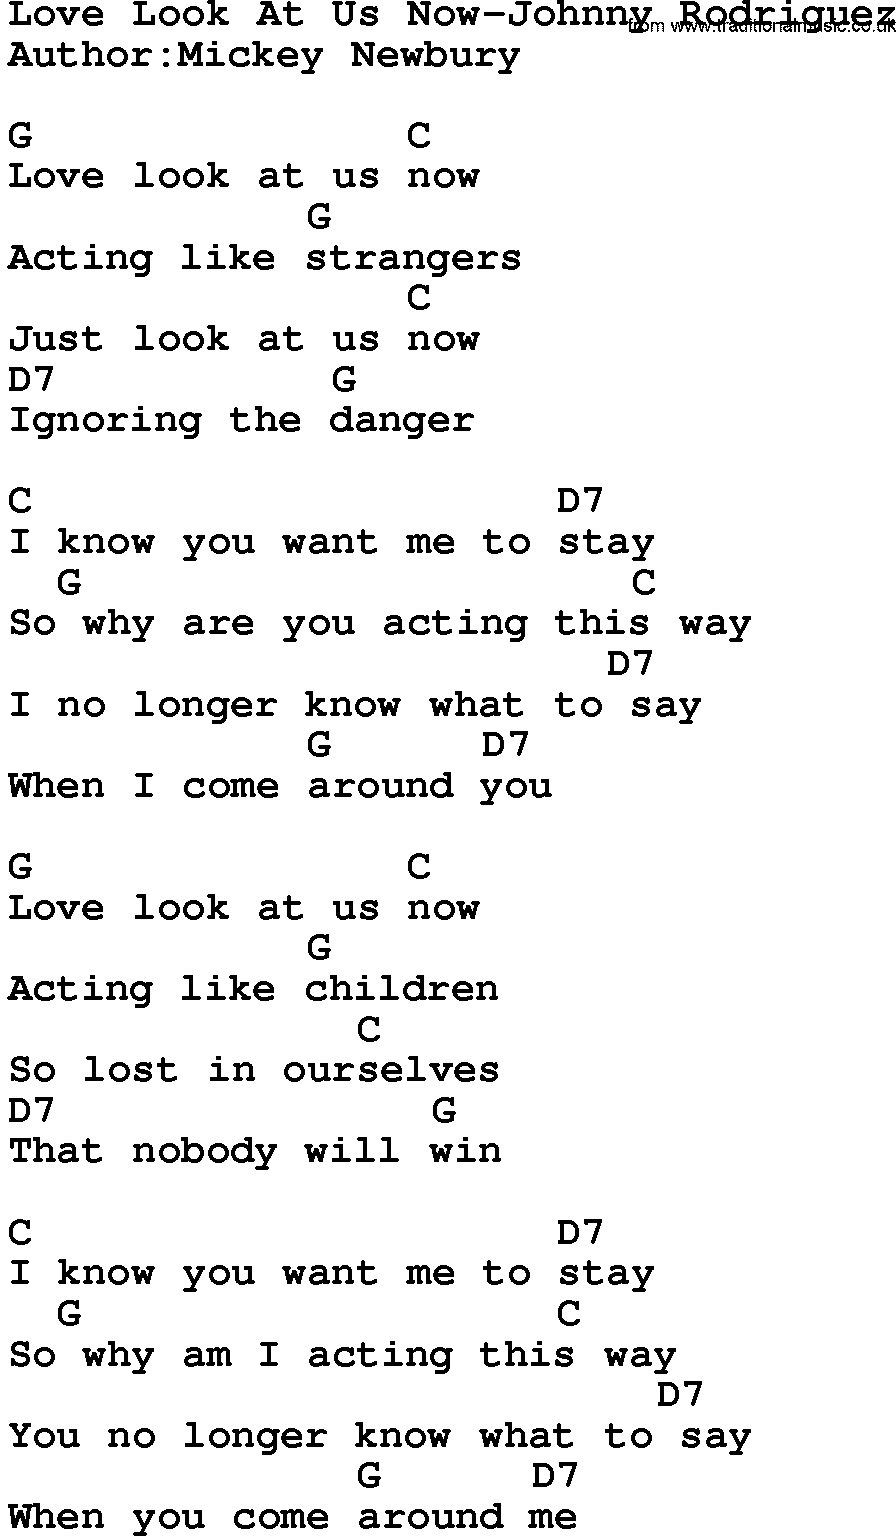 Country music song: Love Look At Us Now-Johnny Rodriguez lyrics and chords